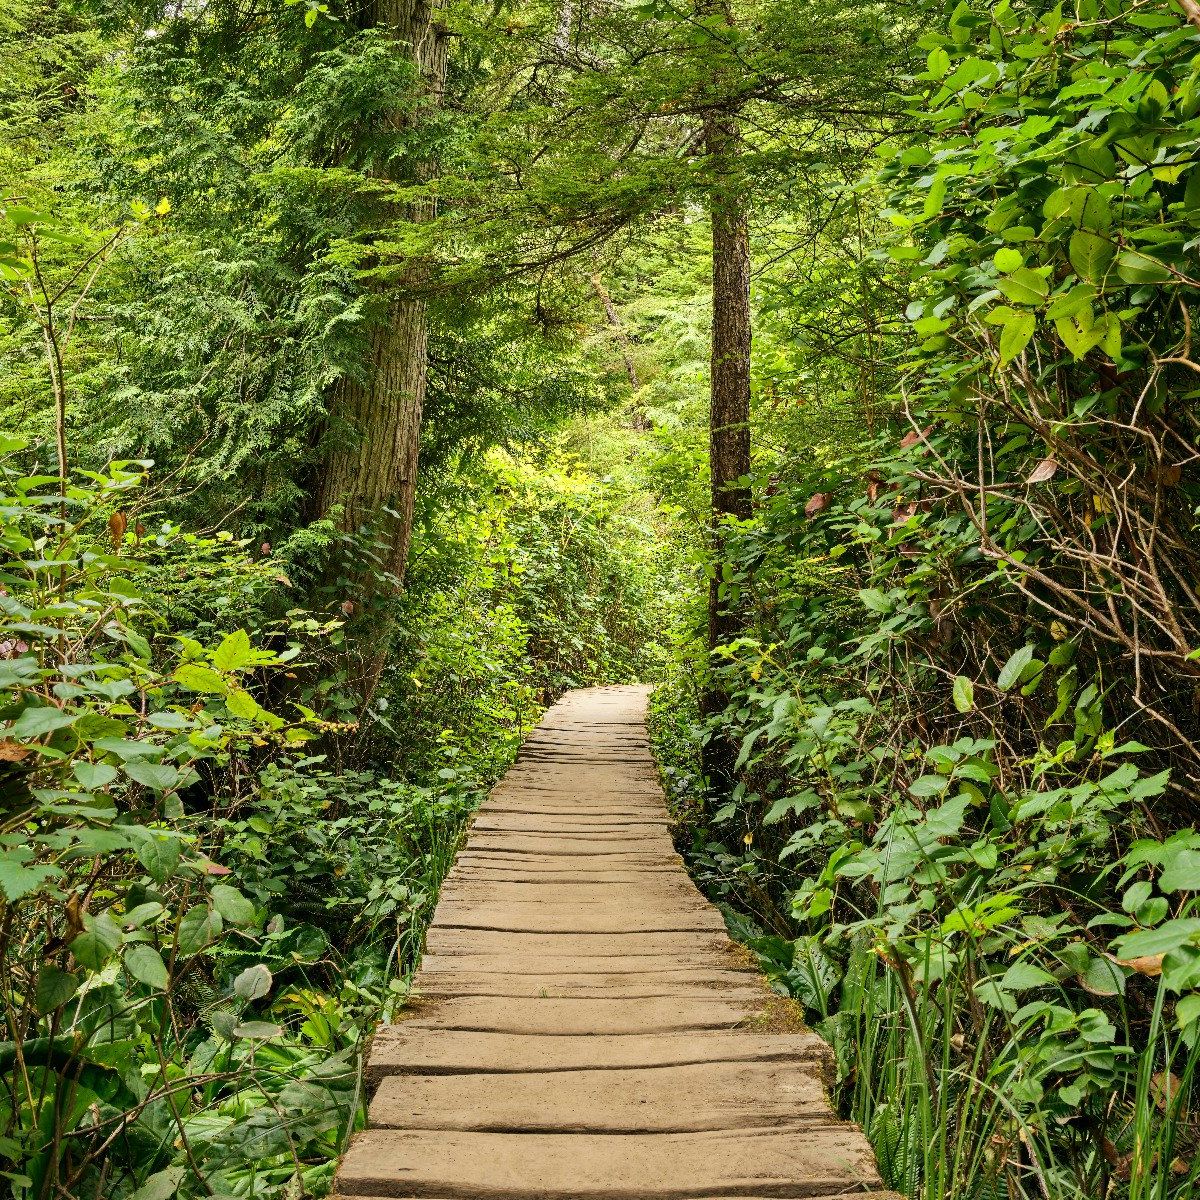 Wooden path through the green